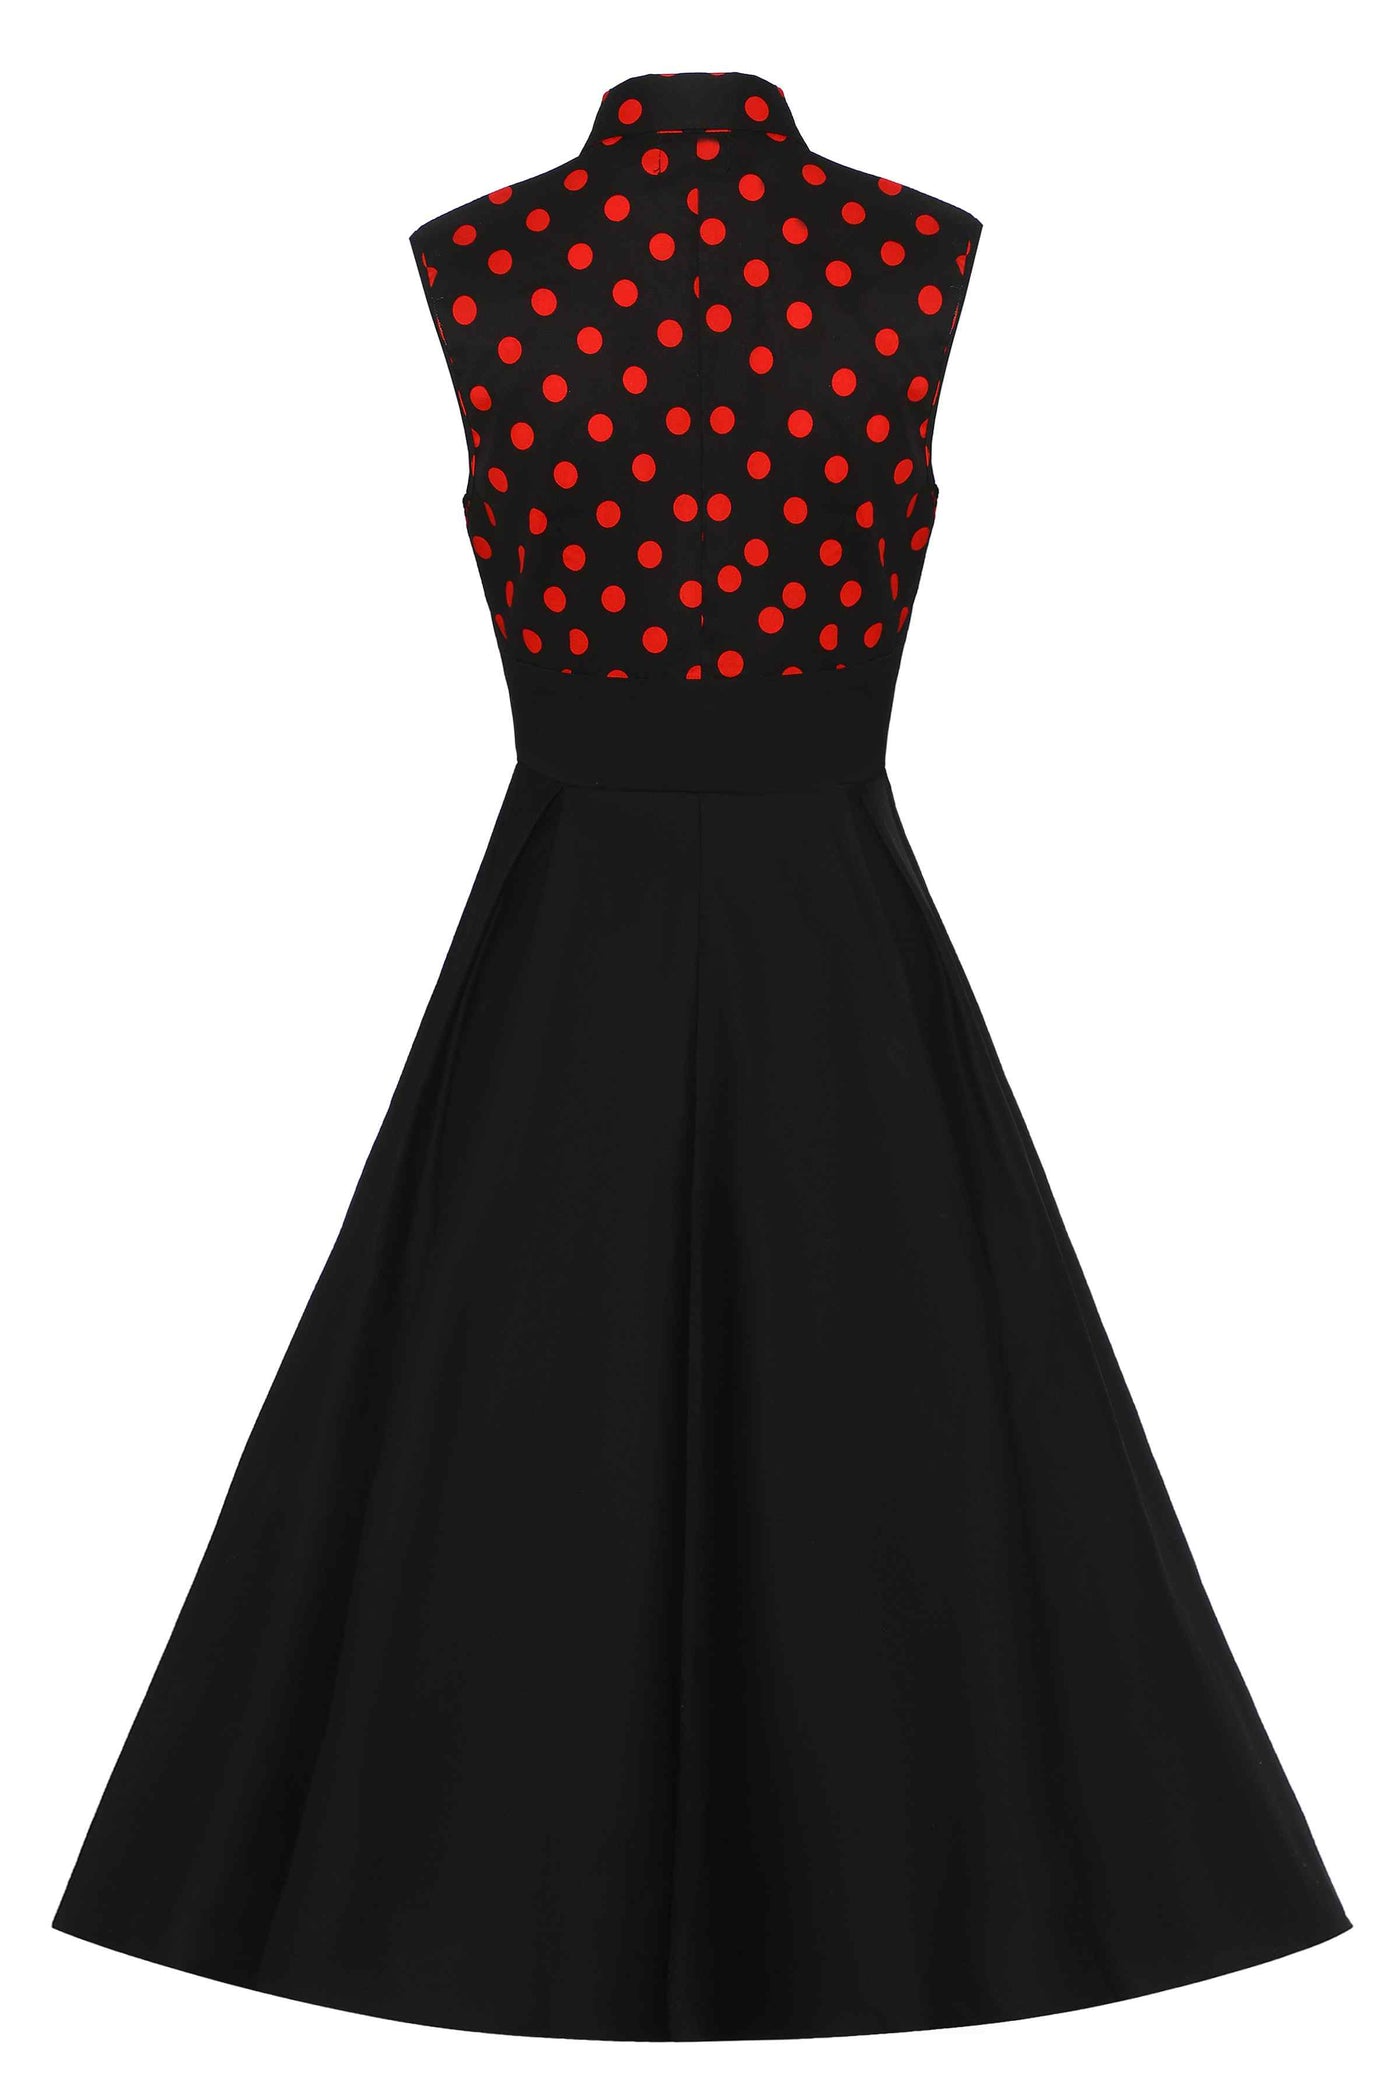 Back view of Polka Dot Shirt Dress in Black and Red